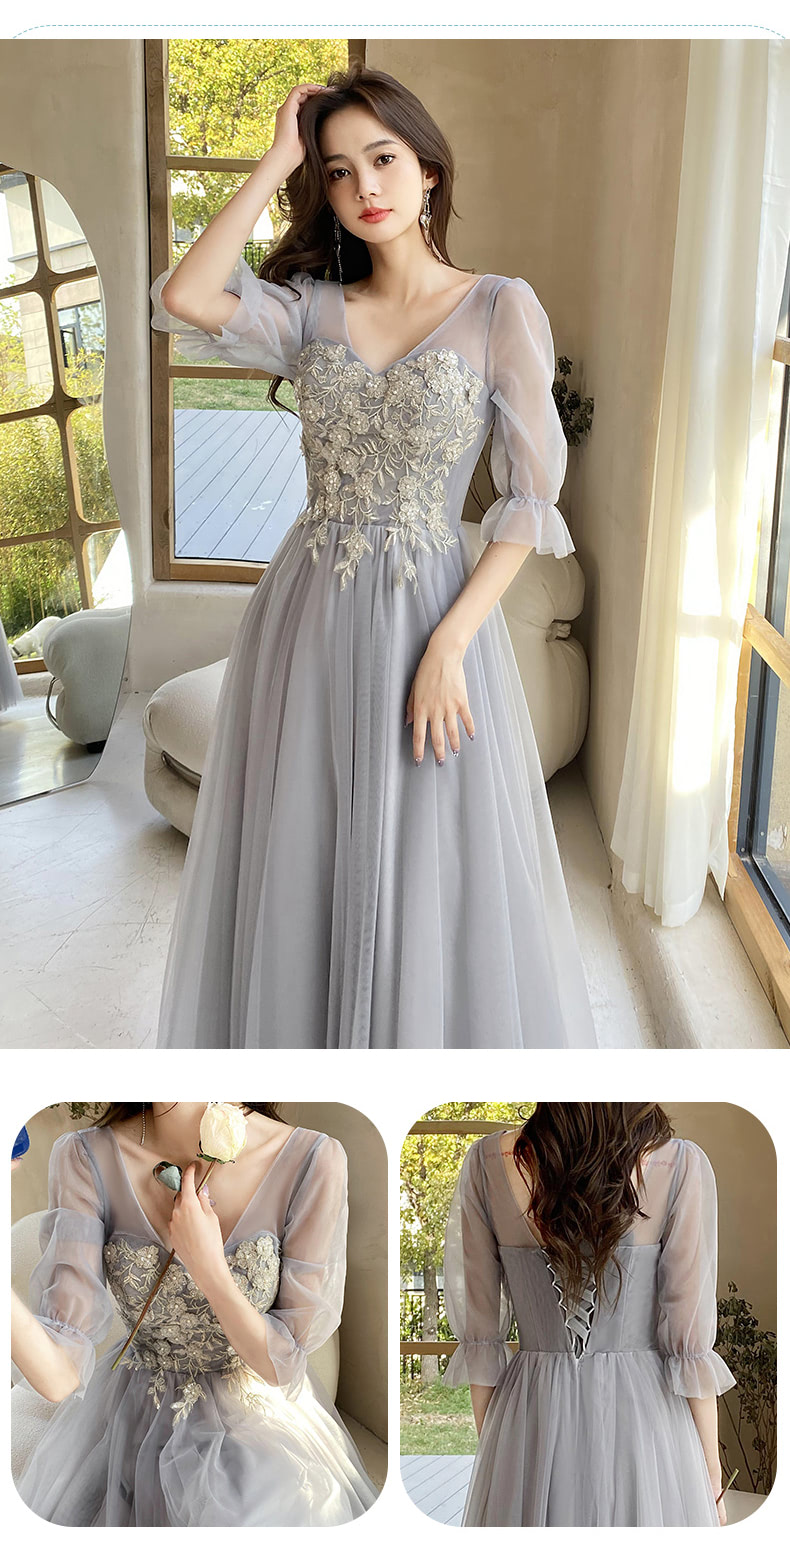 Floral-Embroidery-Gray-Bridesmaid-Party-Formal-Maxi-Long-Dress17.jpg